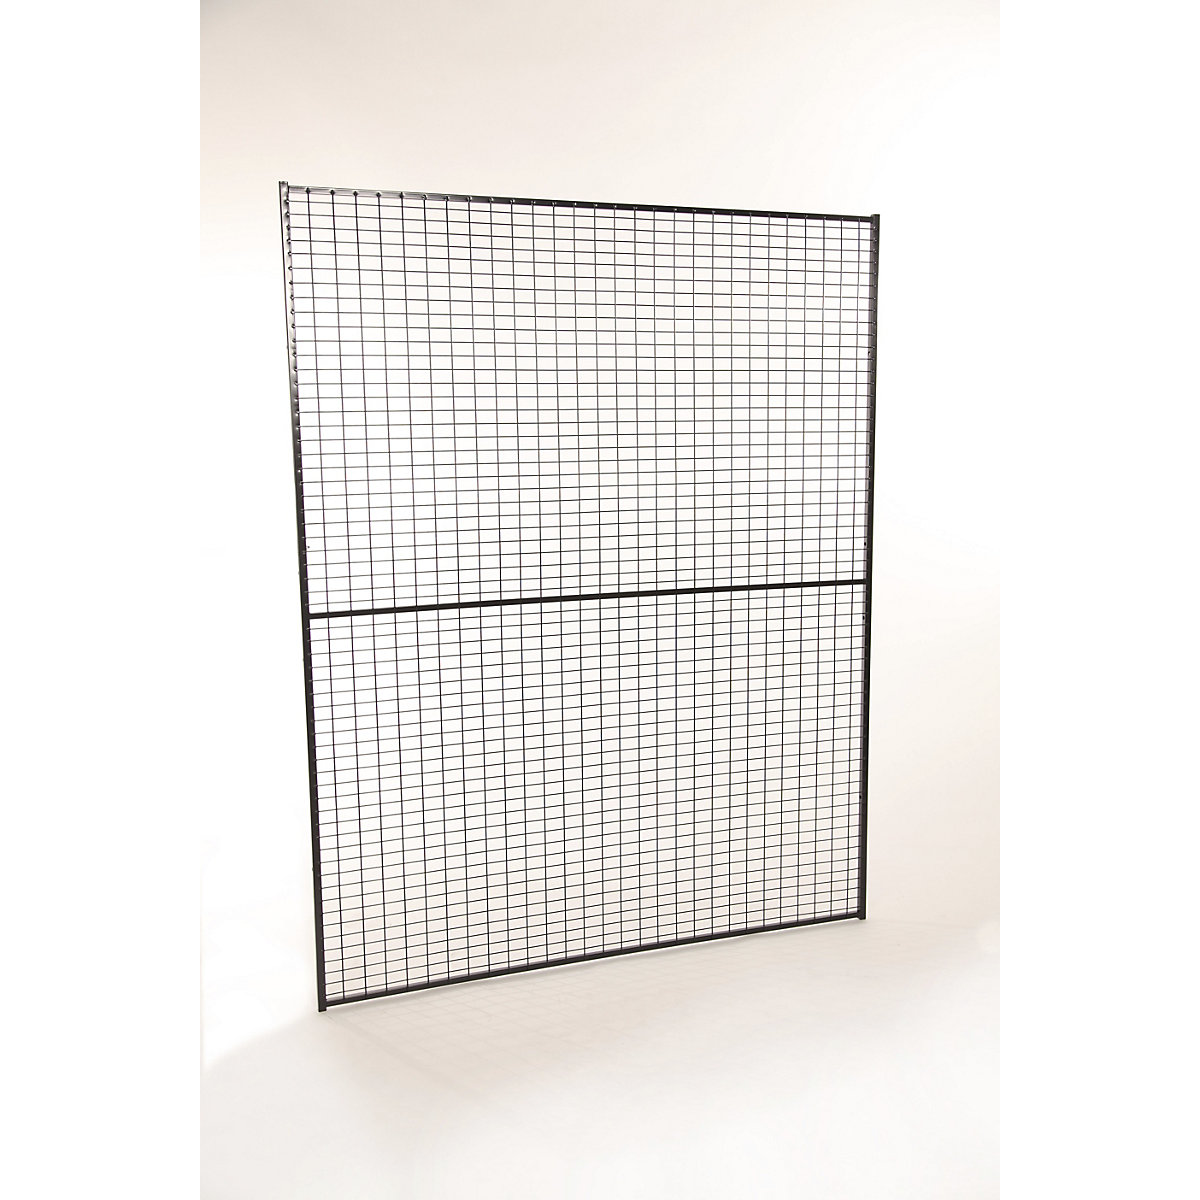 X-GUARD LITE machine protective fencing, wall section – Axelent, height 1900 mm, width 1200 mm-4